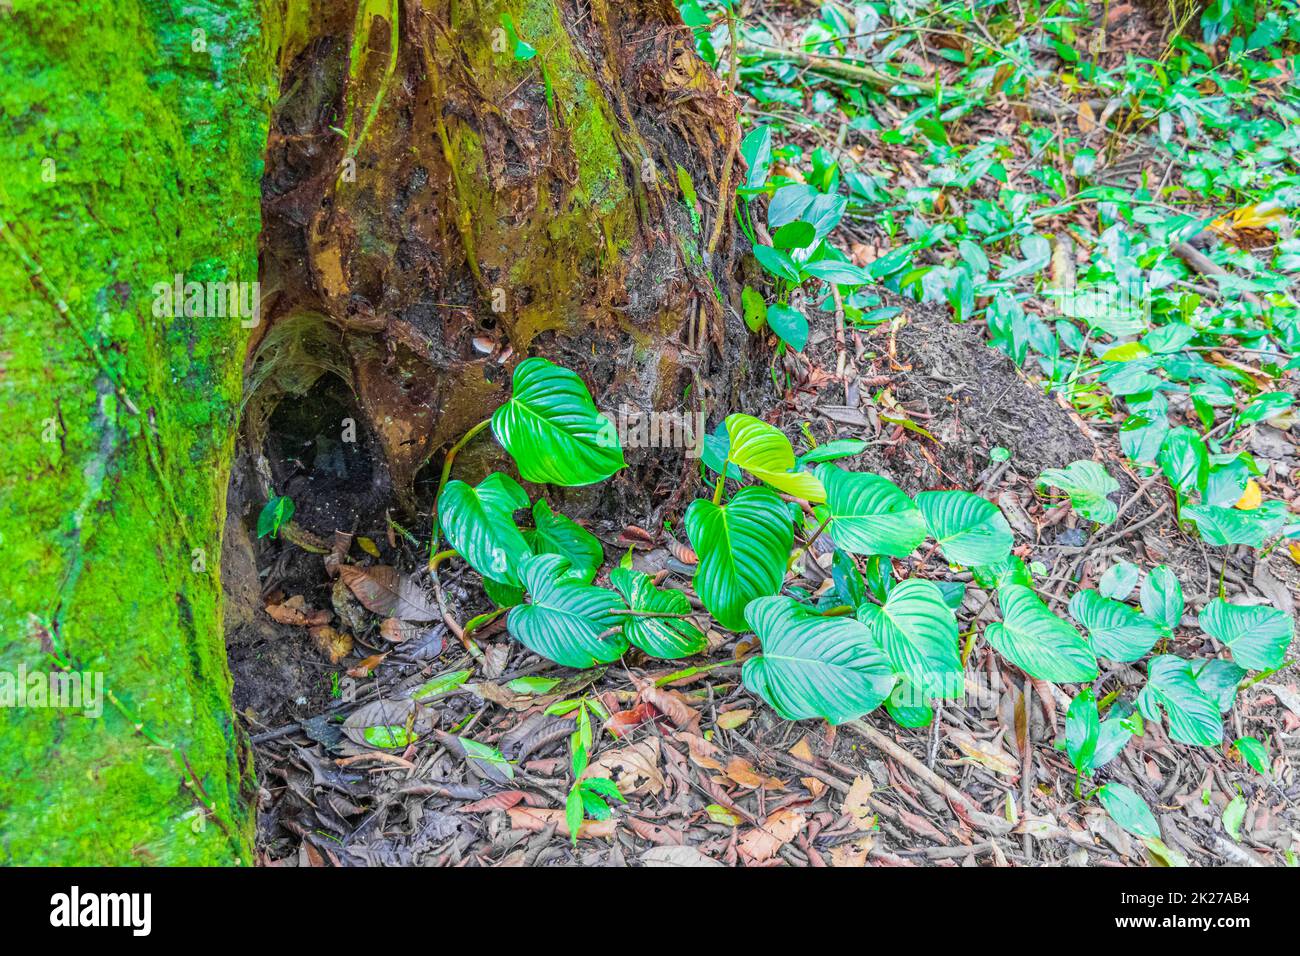 Plants trees flowers natural tropical jungle forest Ilha Grande Brazil. Stock Photo